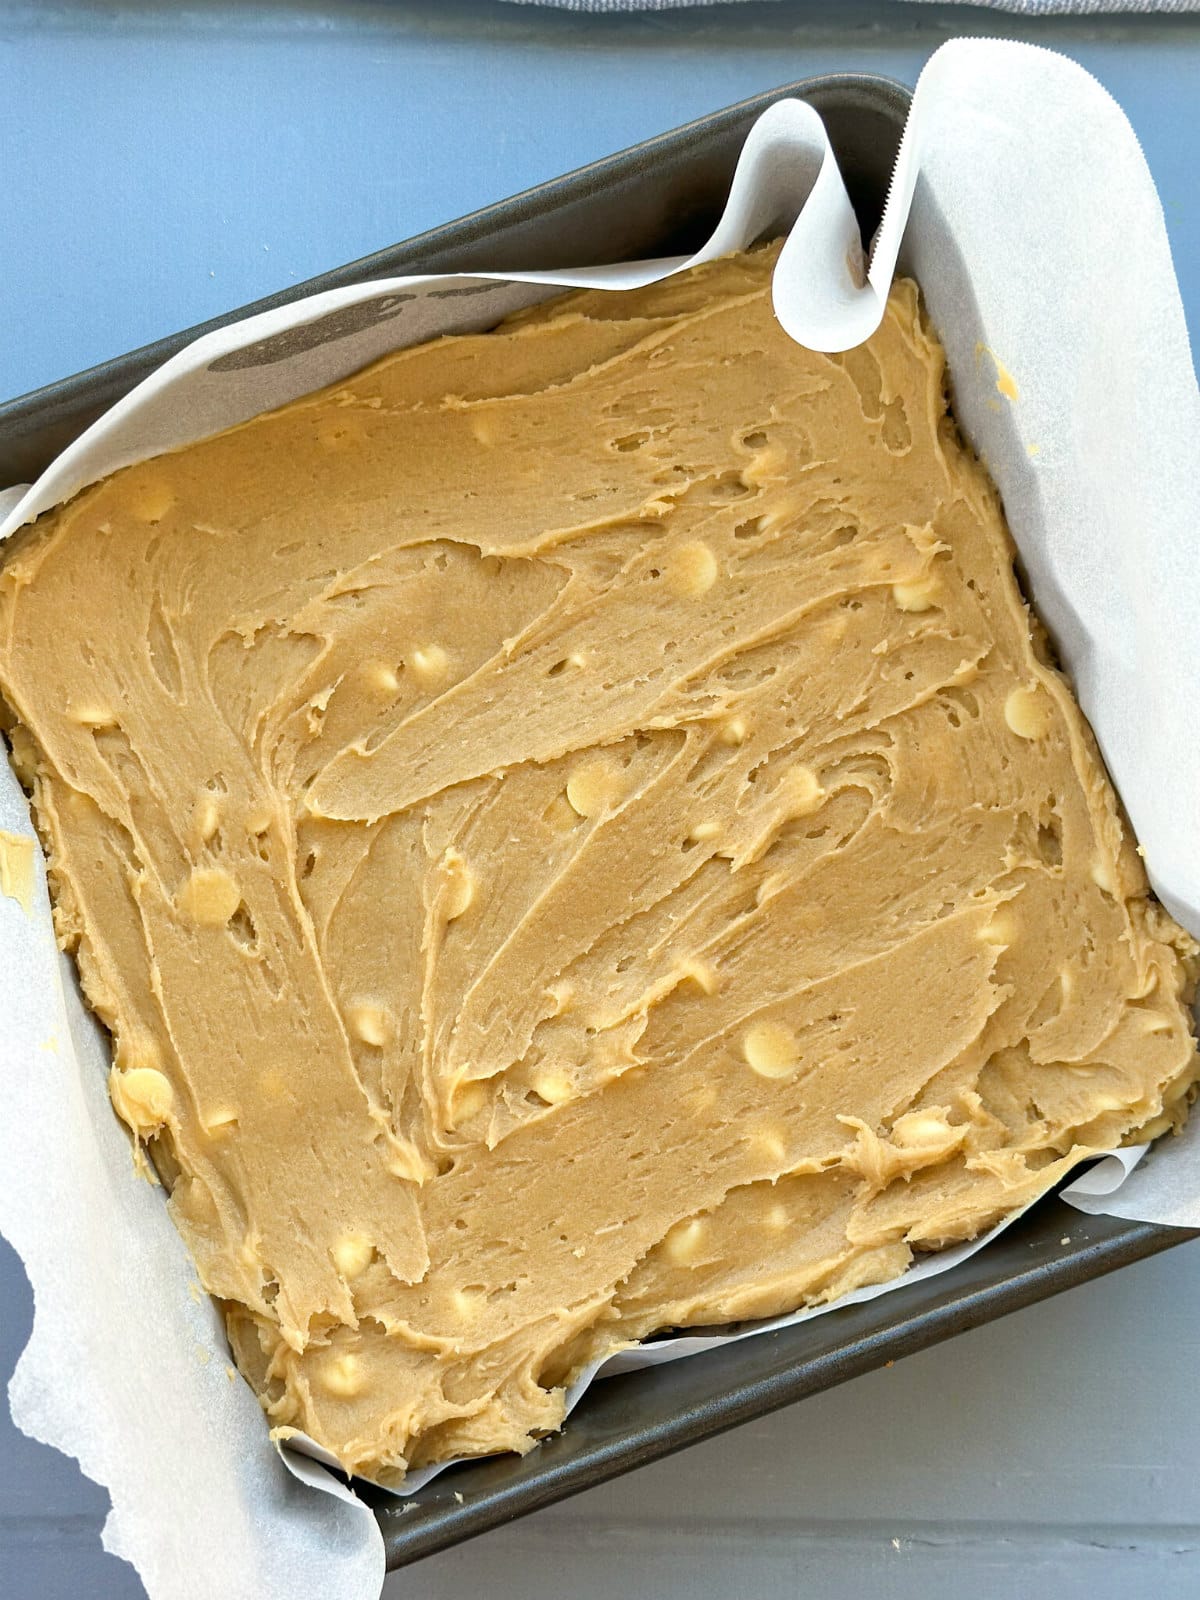 Blondie recipe in a baking paper lined pan ready to go in the oven